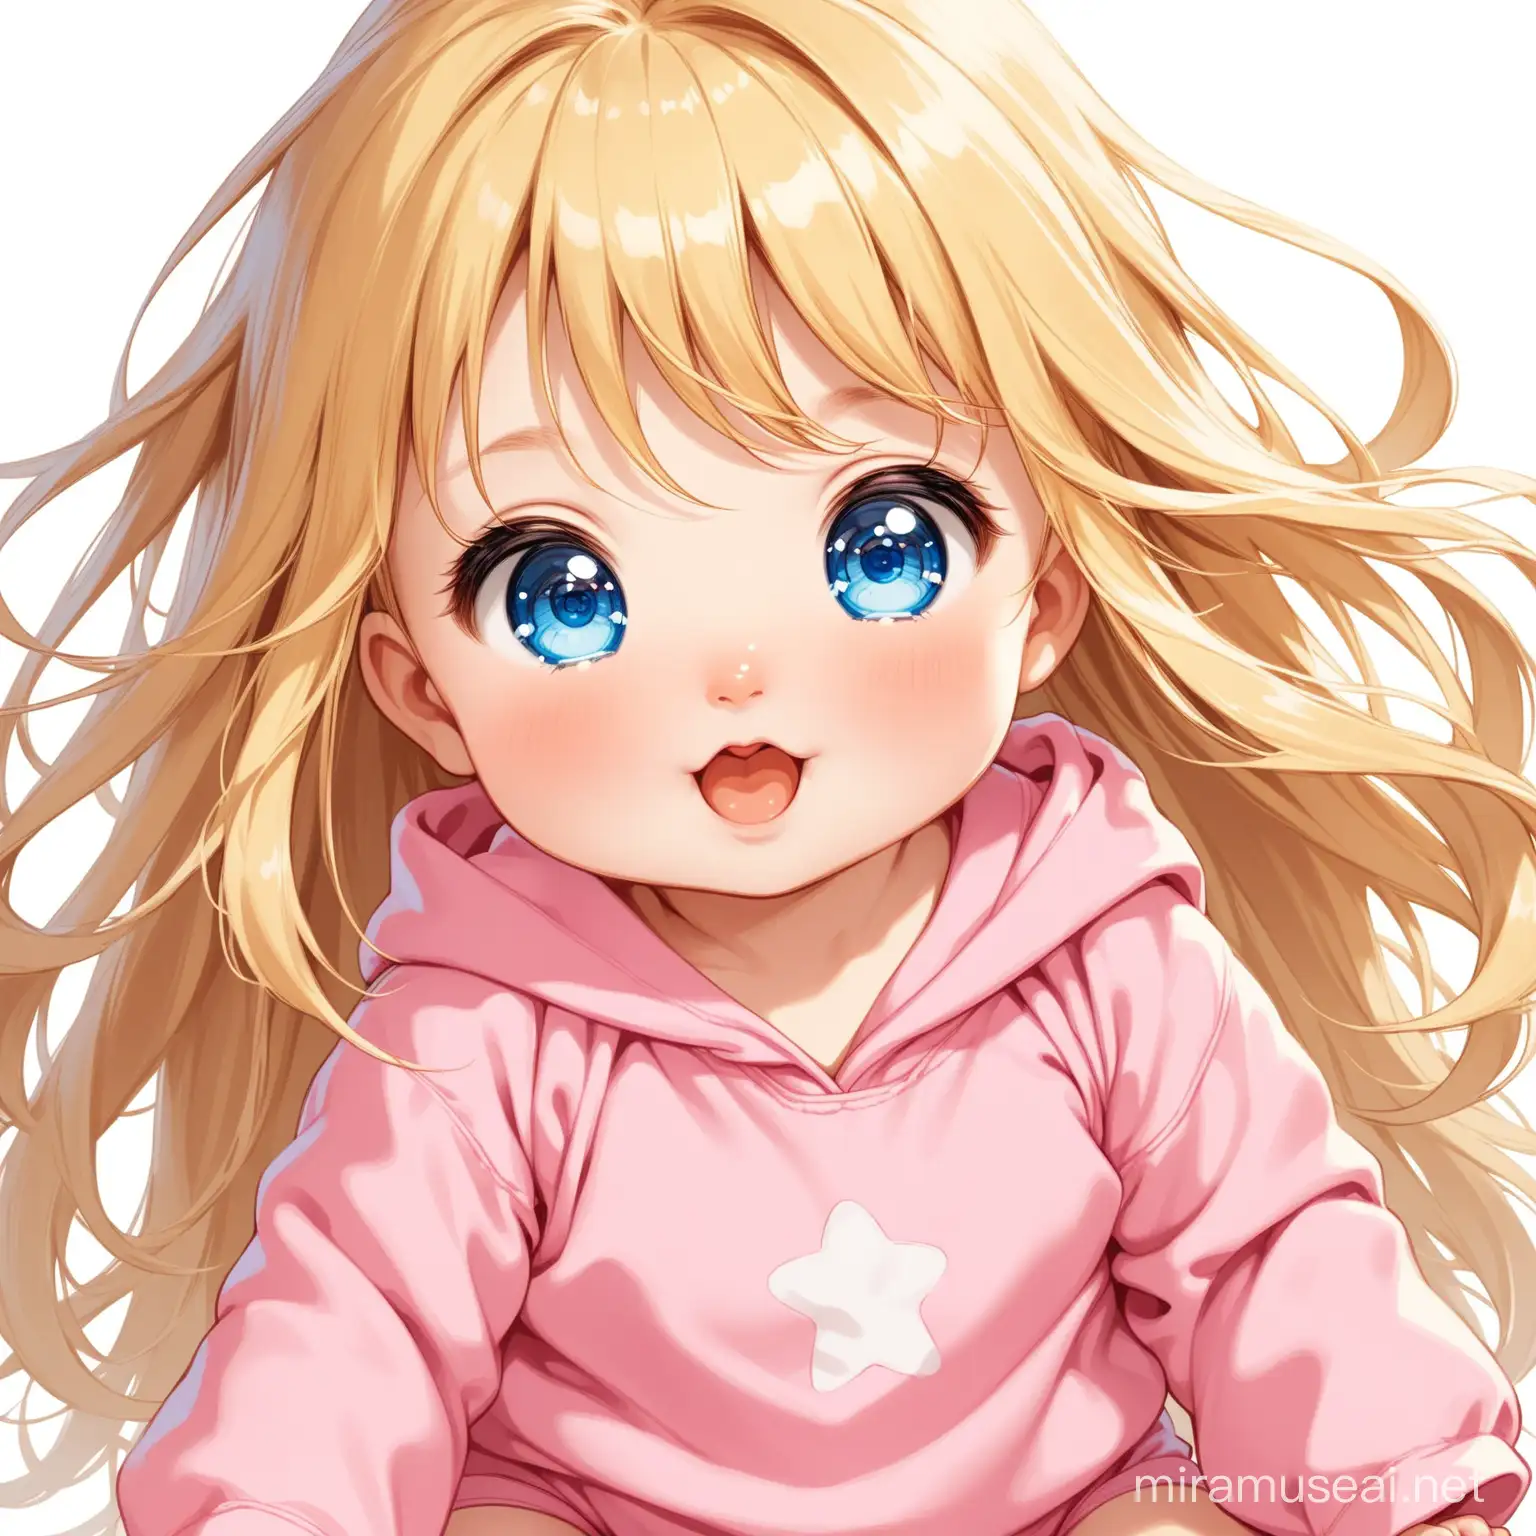 Adorable Baby Girl with Blue Eyes and Messy Blonde Hair in Pink Onesie